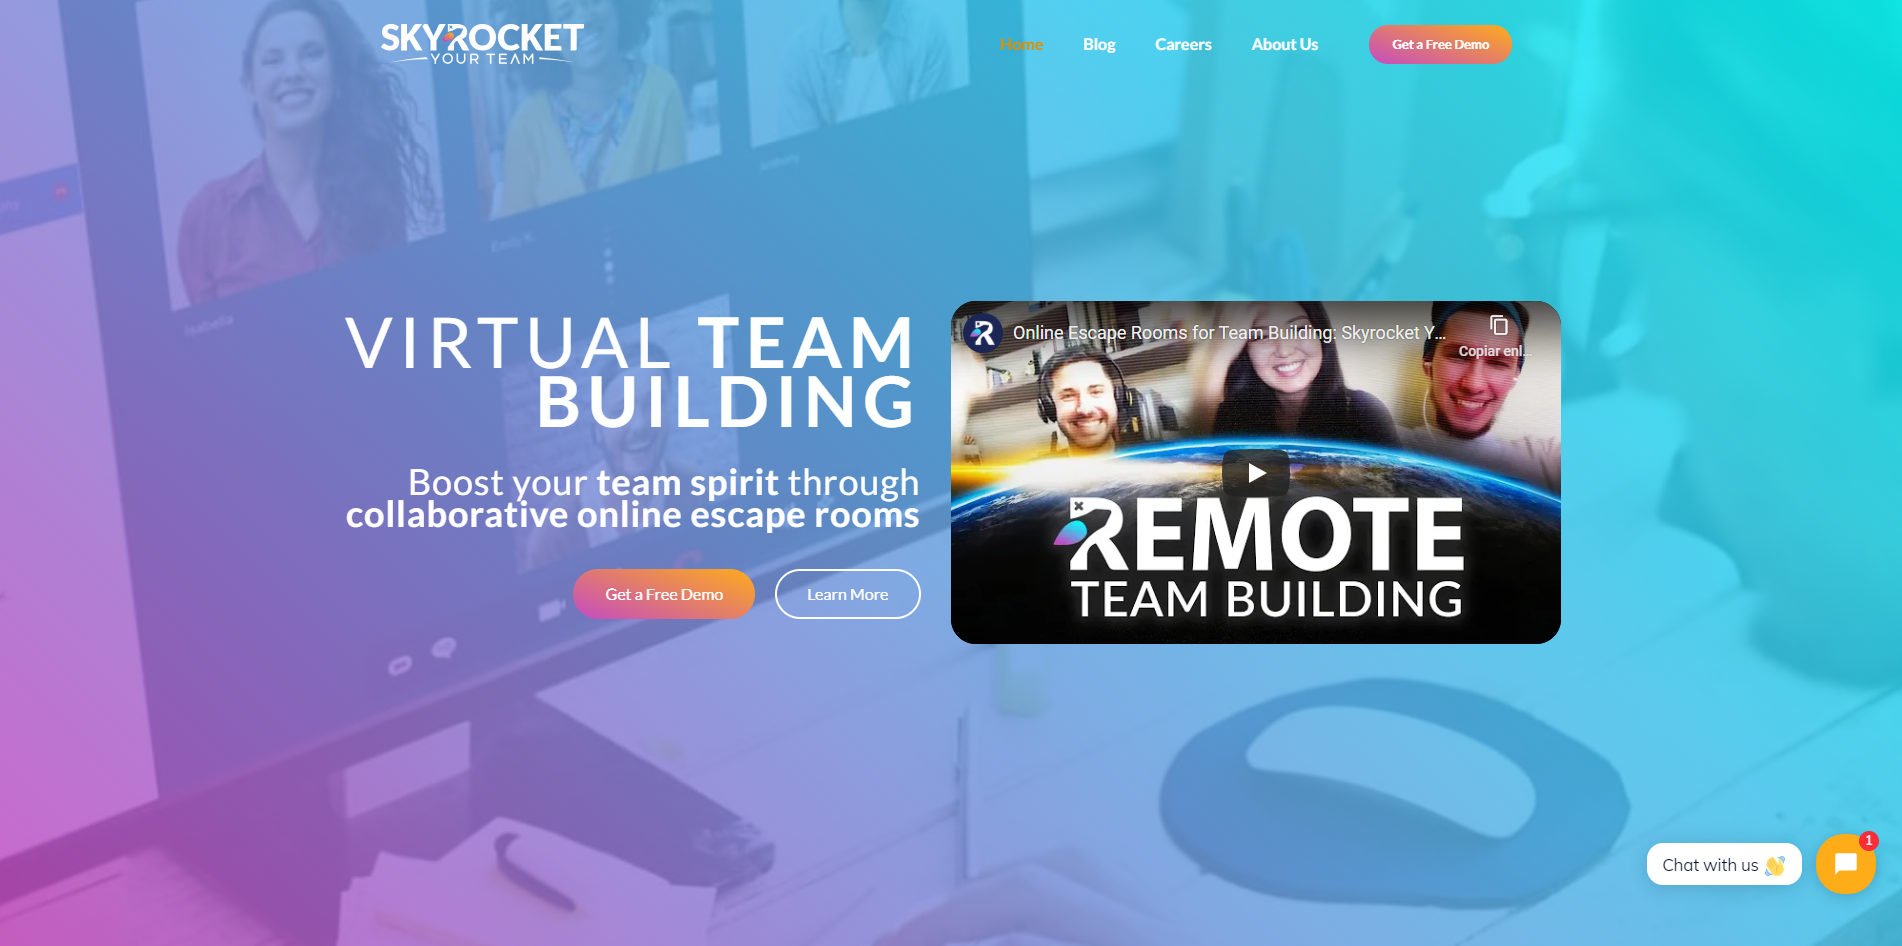 Get feedback from a vast remote working audience about Skyrocket Your Team